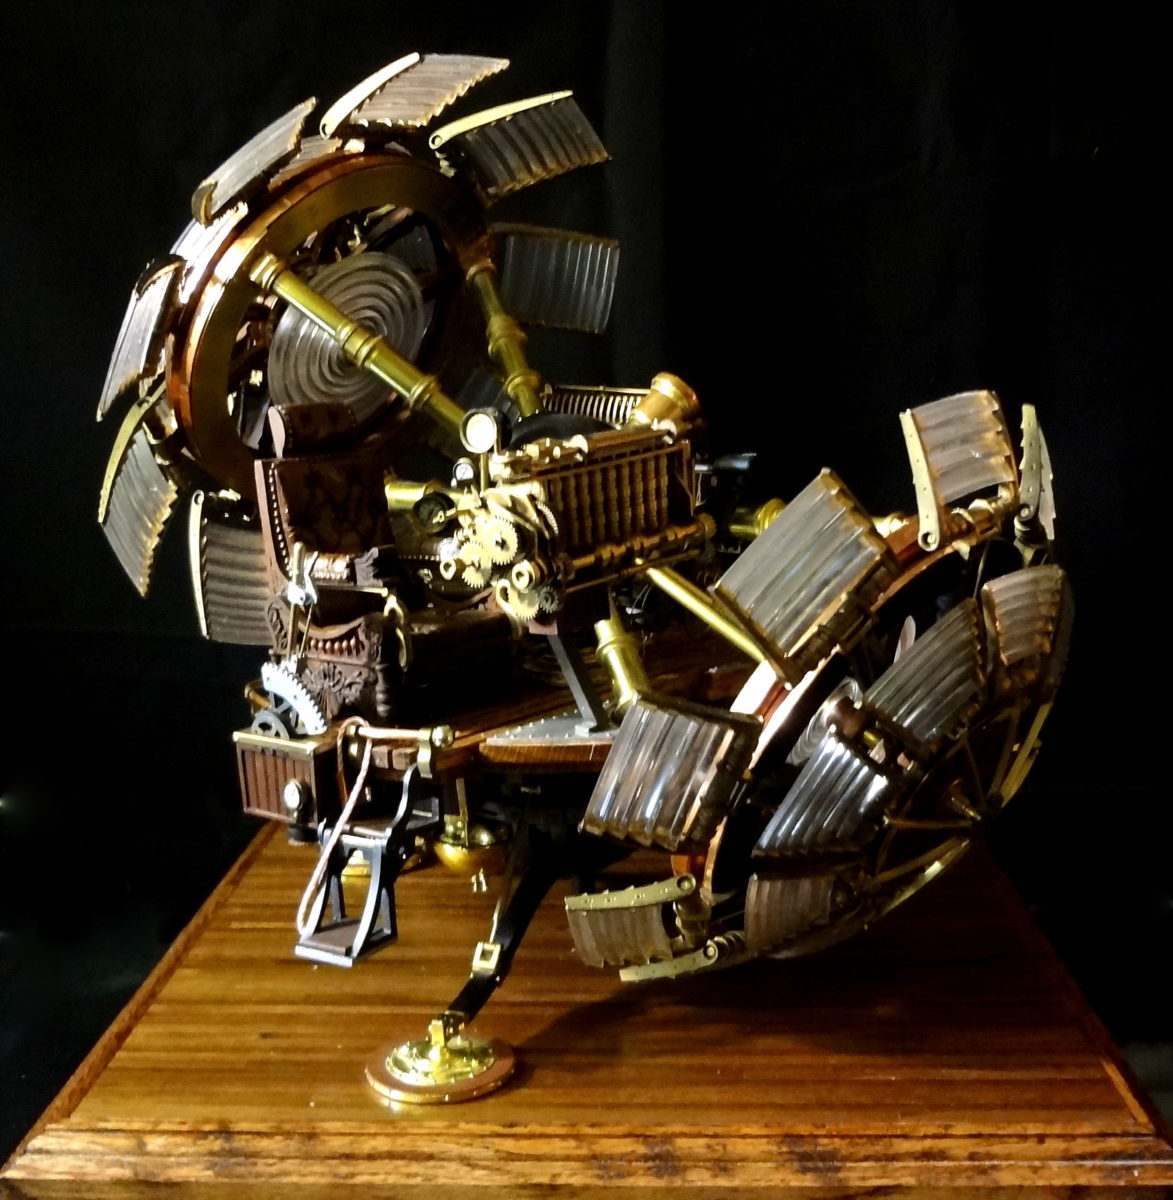 UGEARS Launches 12 New Mechanical Models (Sponsor) | Colossal